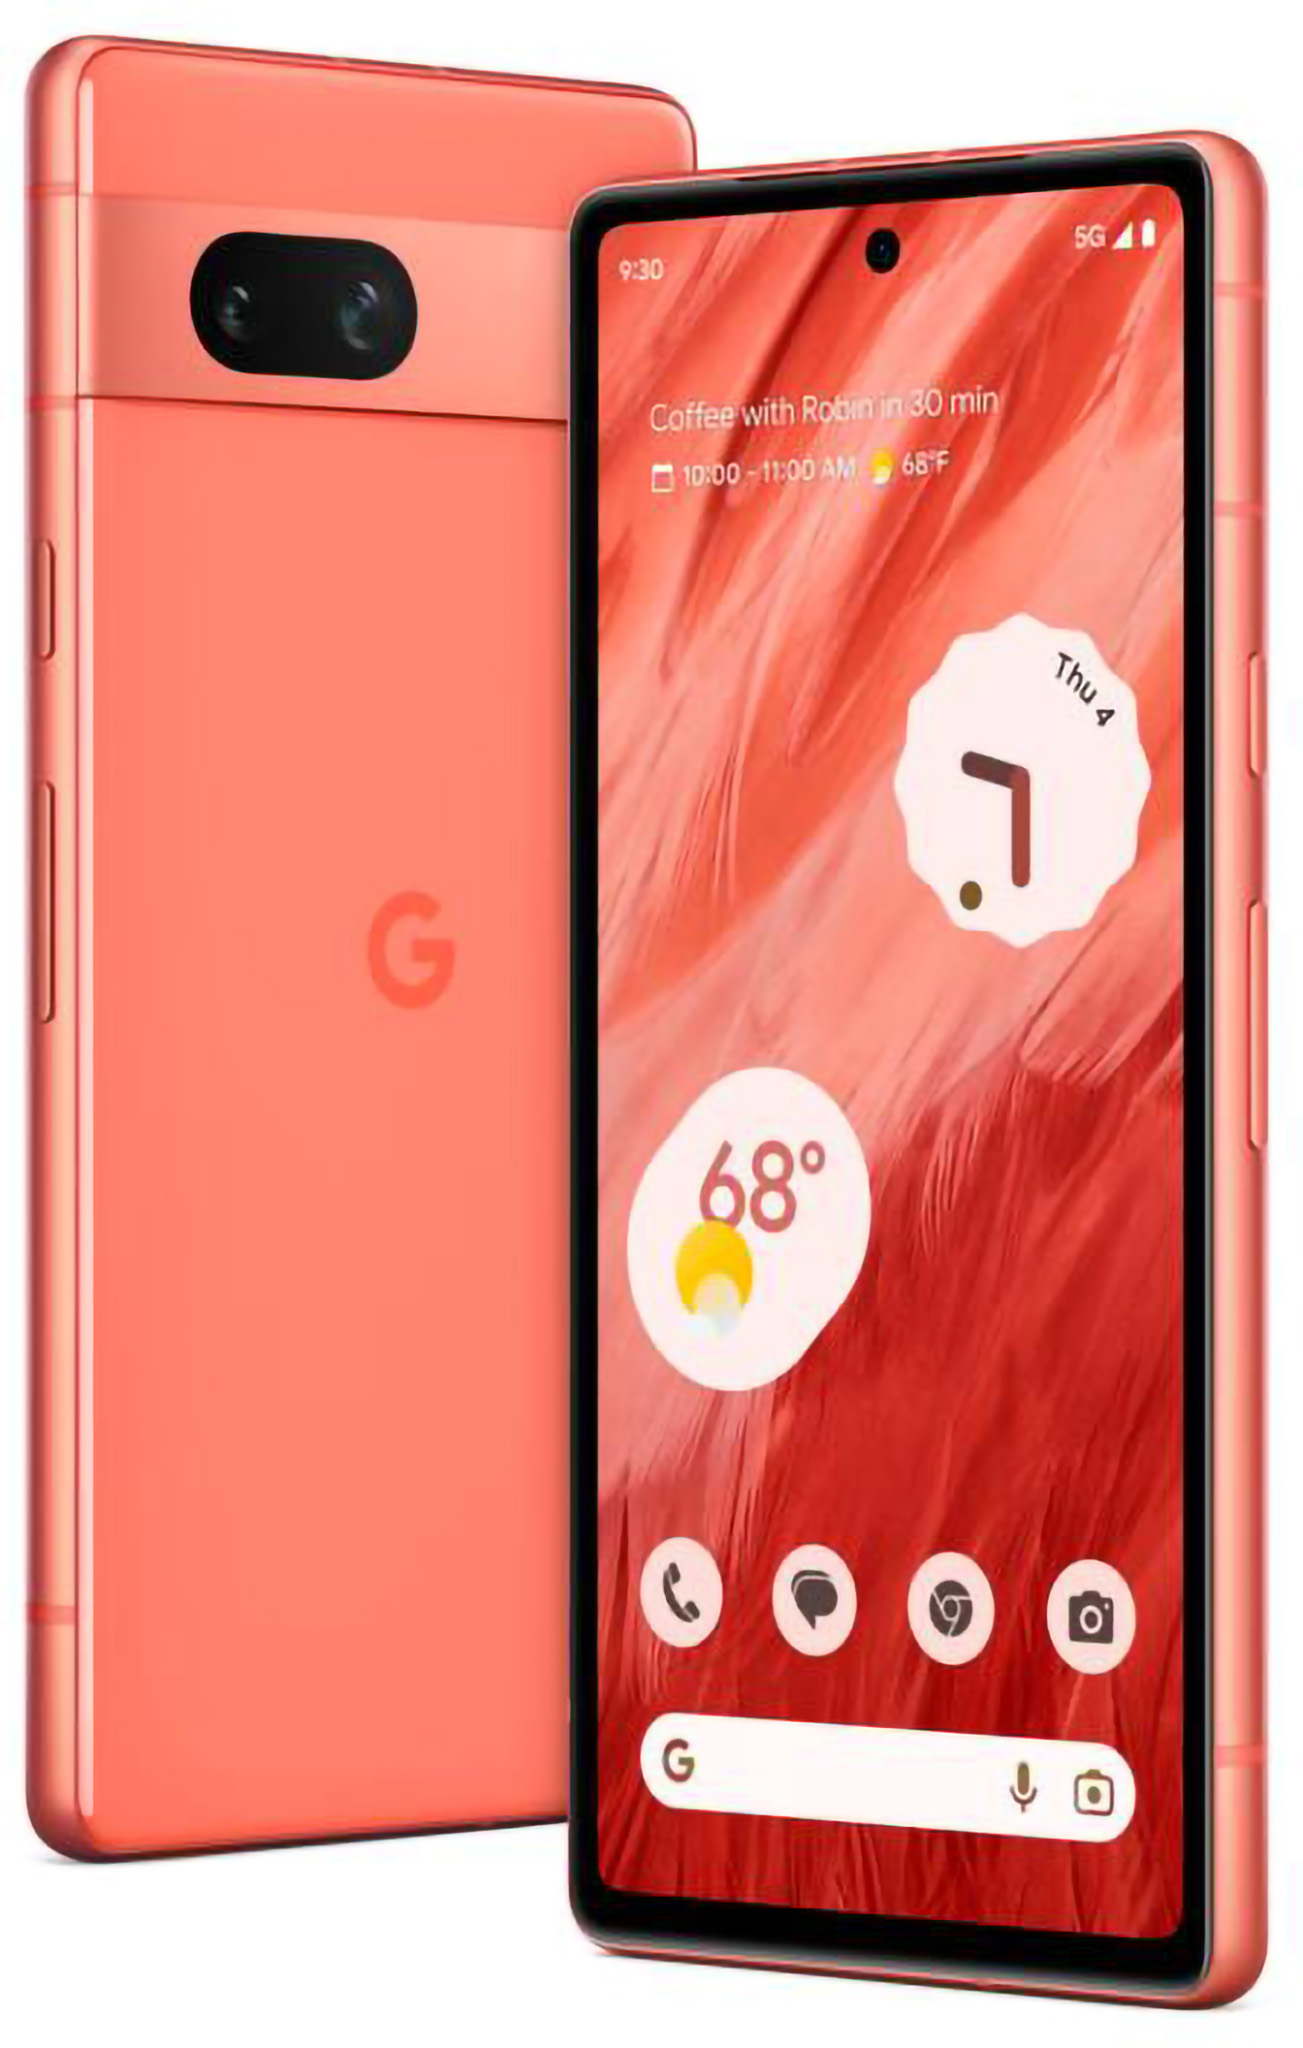 Official render of the Google Pixel 7a